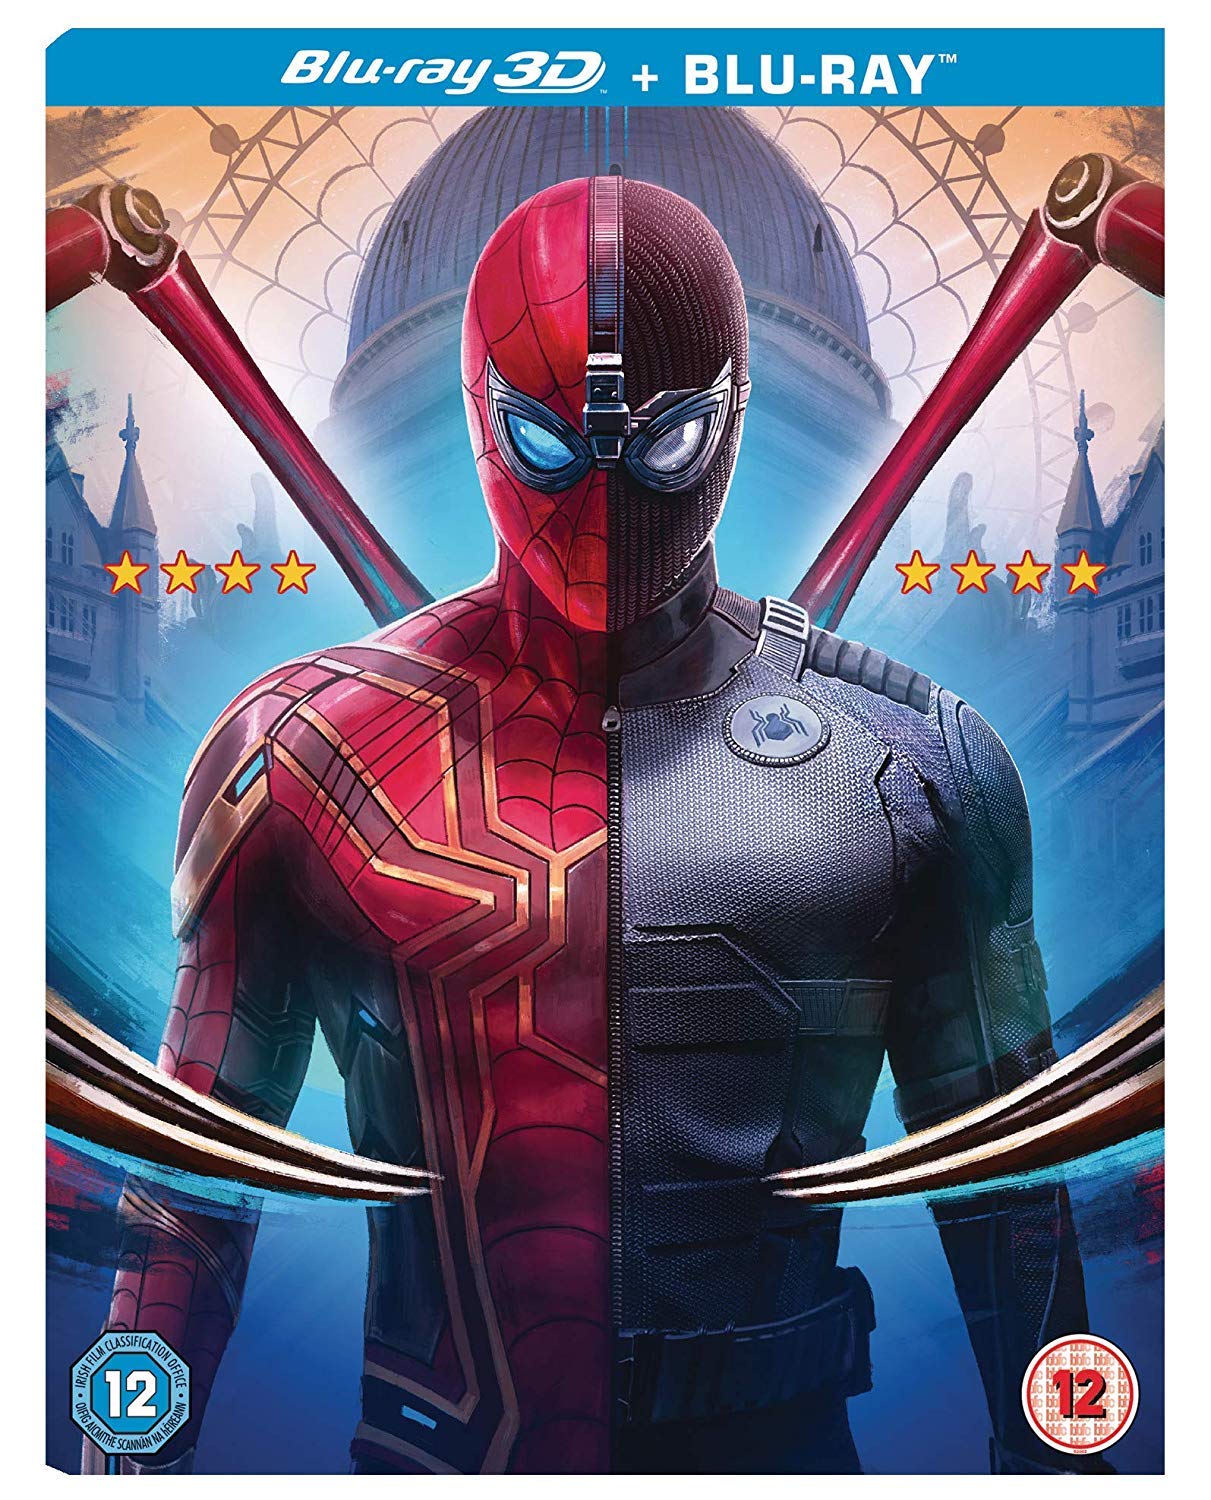 Spiderman Far From Home China Poster Wallpapers